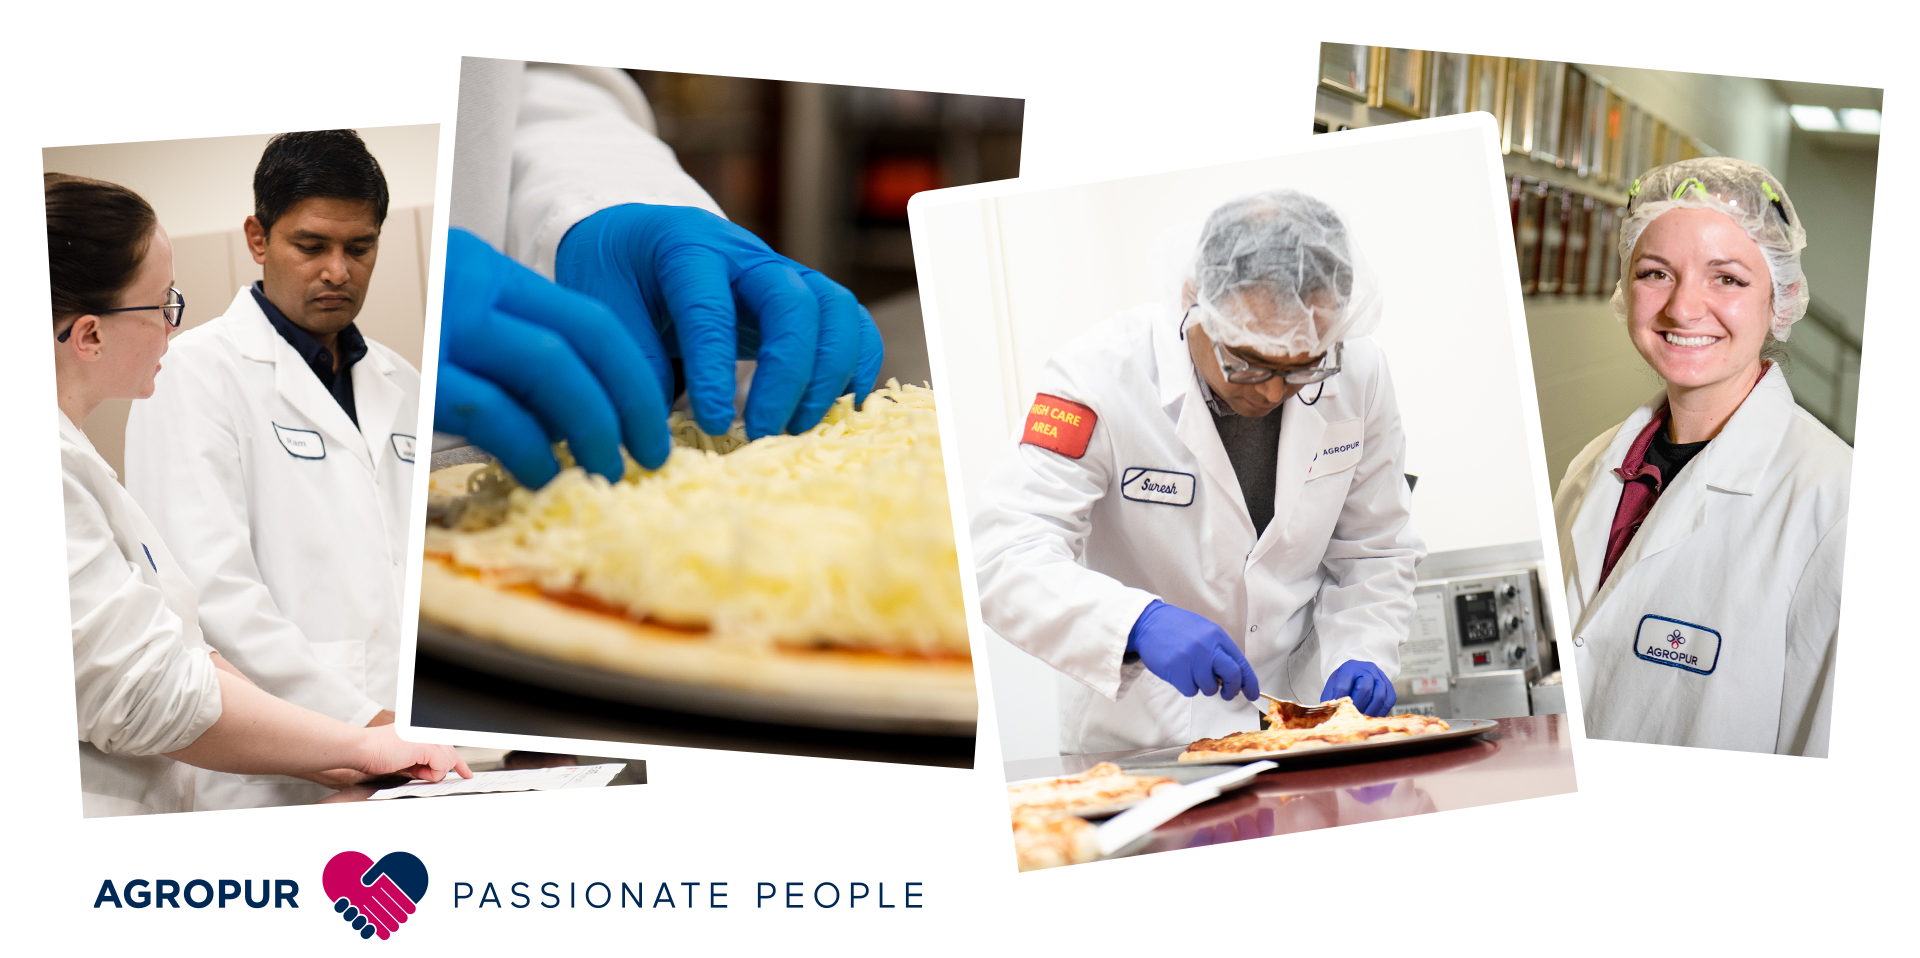 Agropur shows passion through cheese innovation